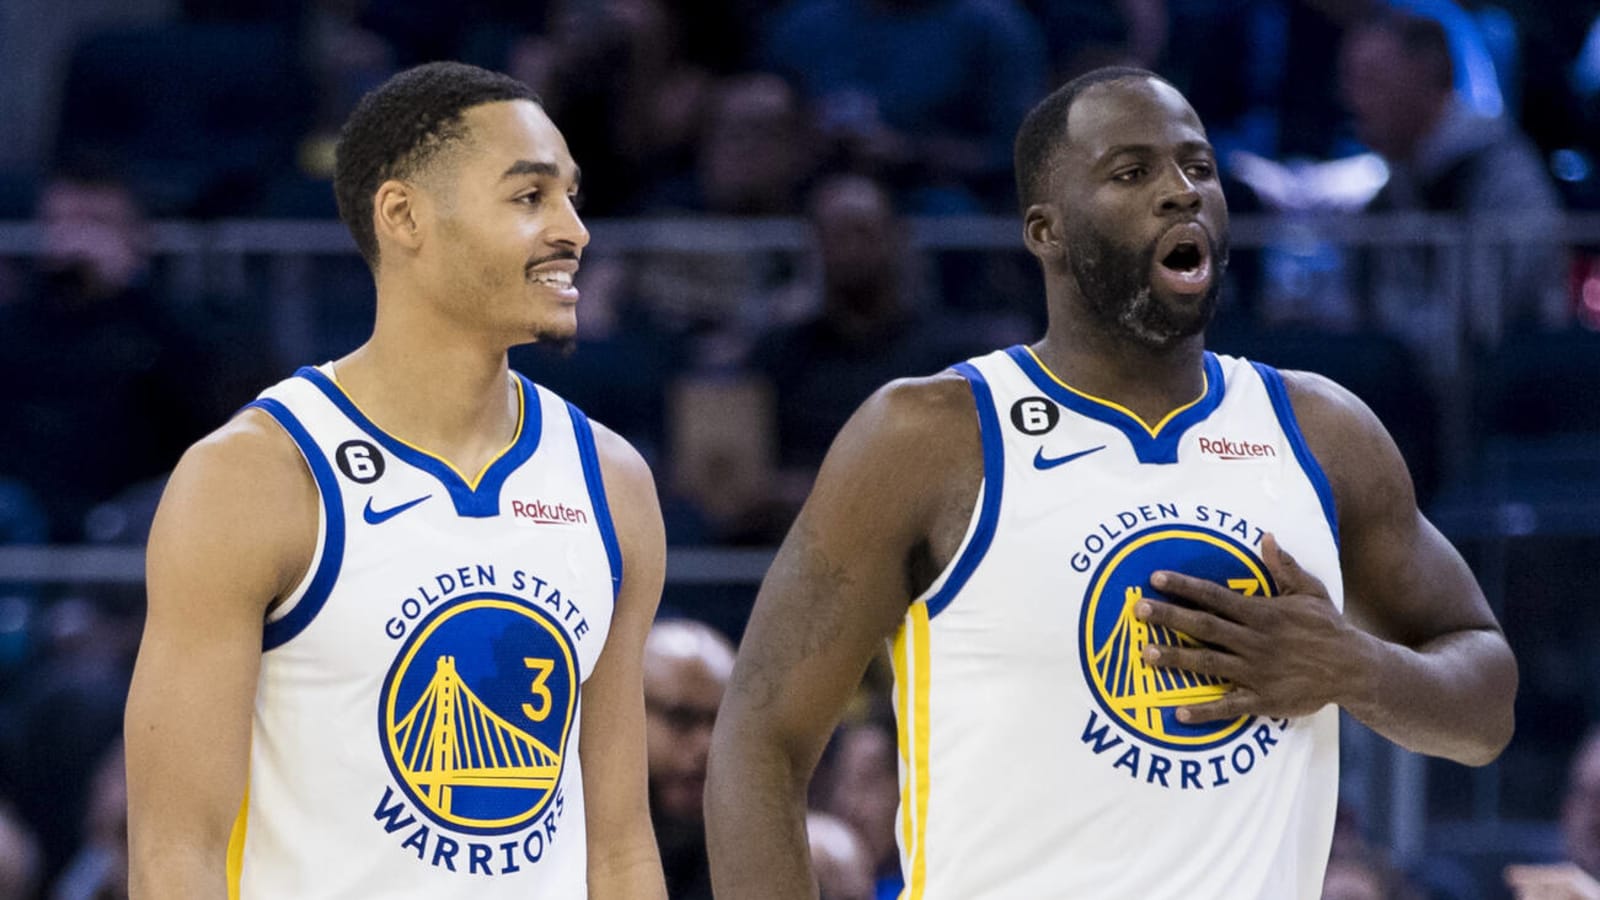 Draymond Green discusses relationship with Jordan Poole